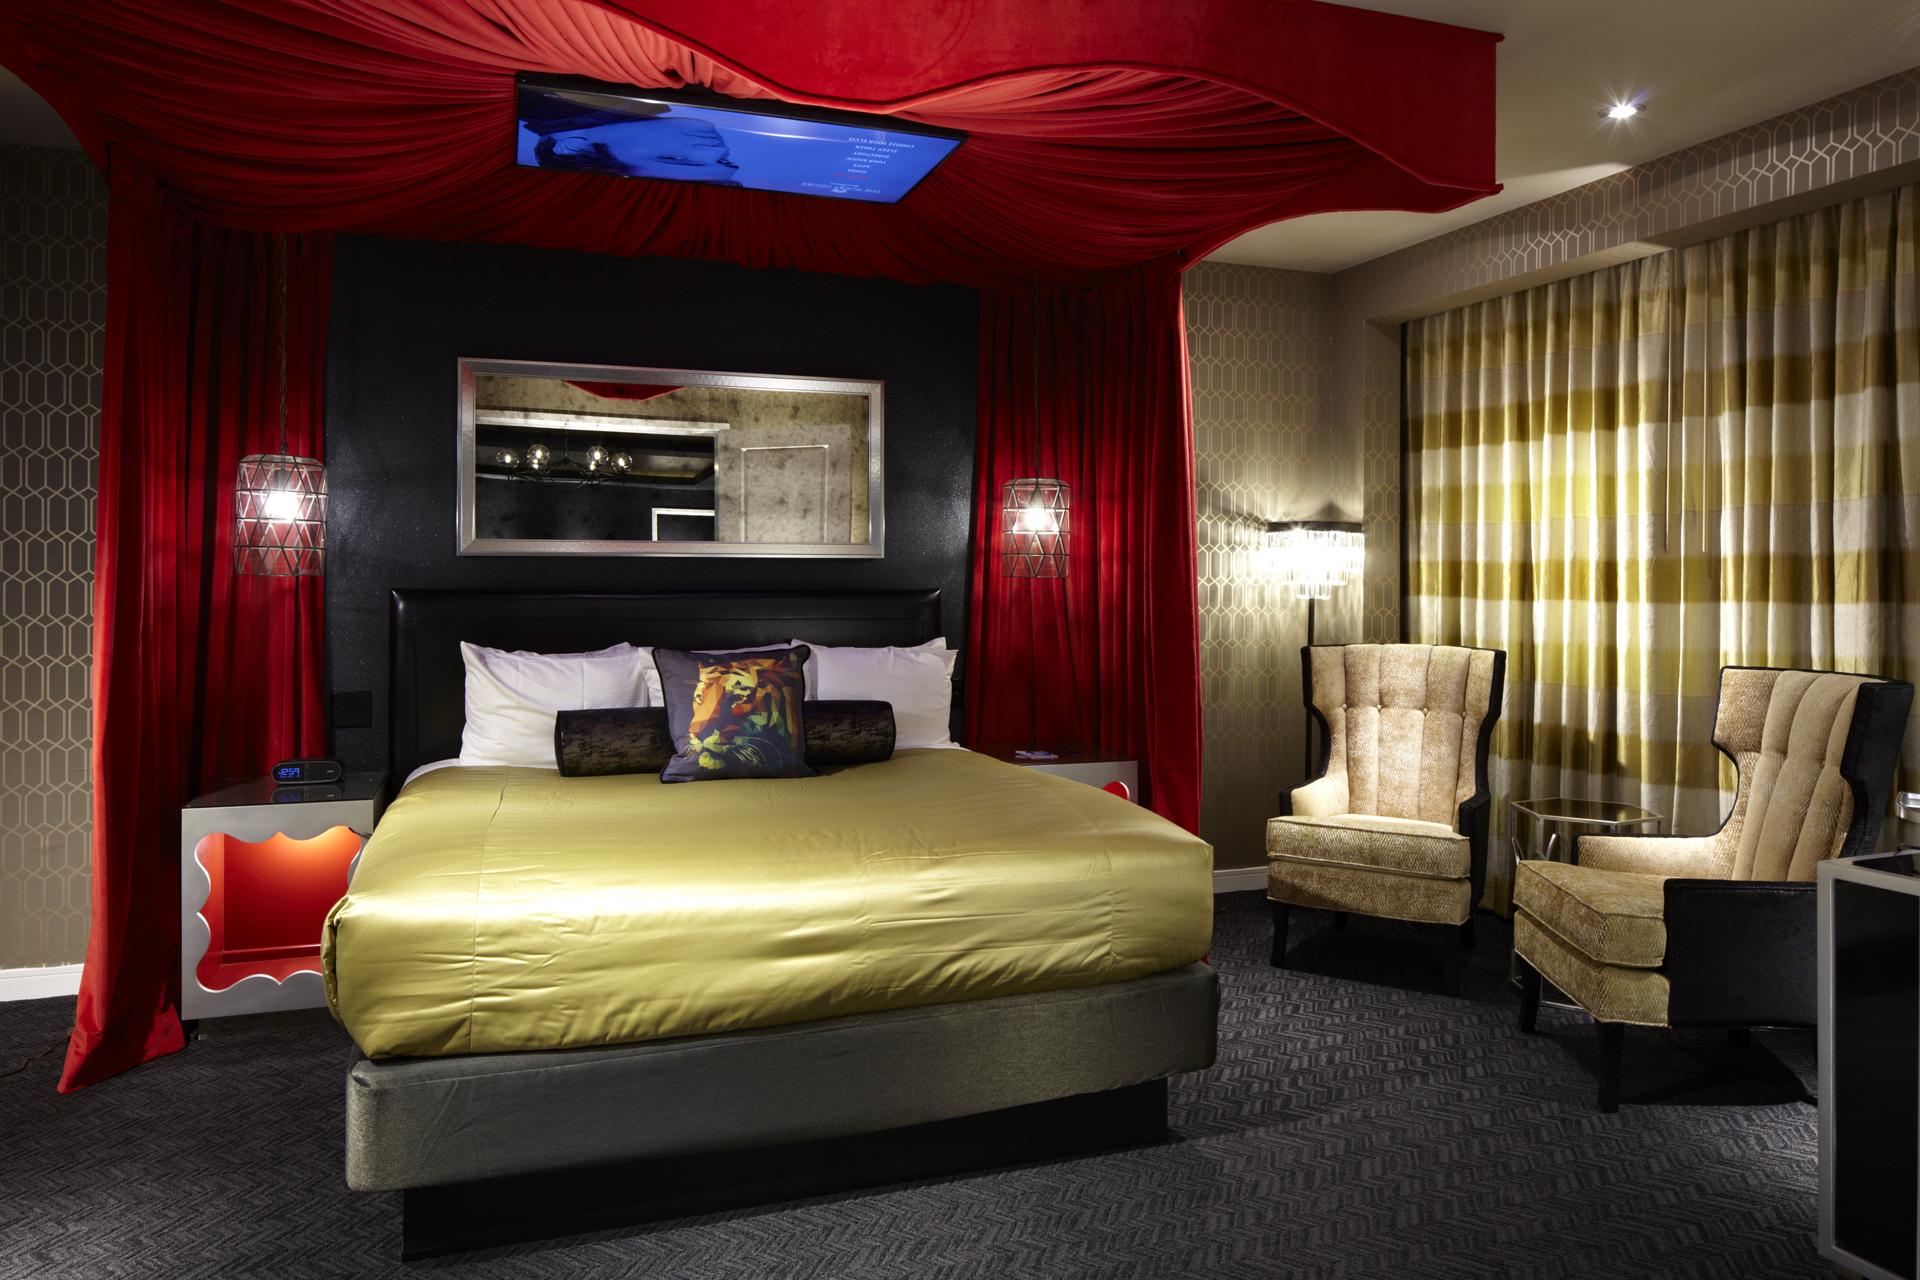 Elvis Presley Fans Can Now Sleep at Graceland's Guest House